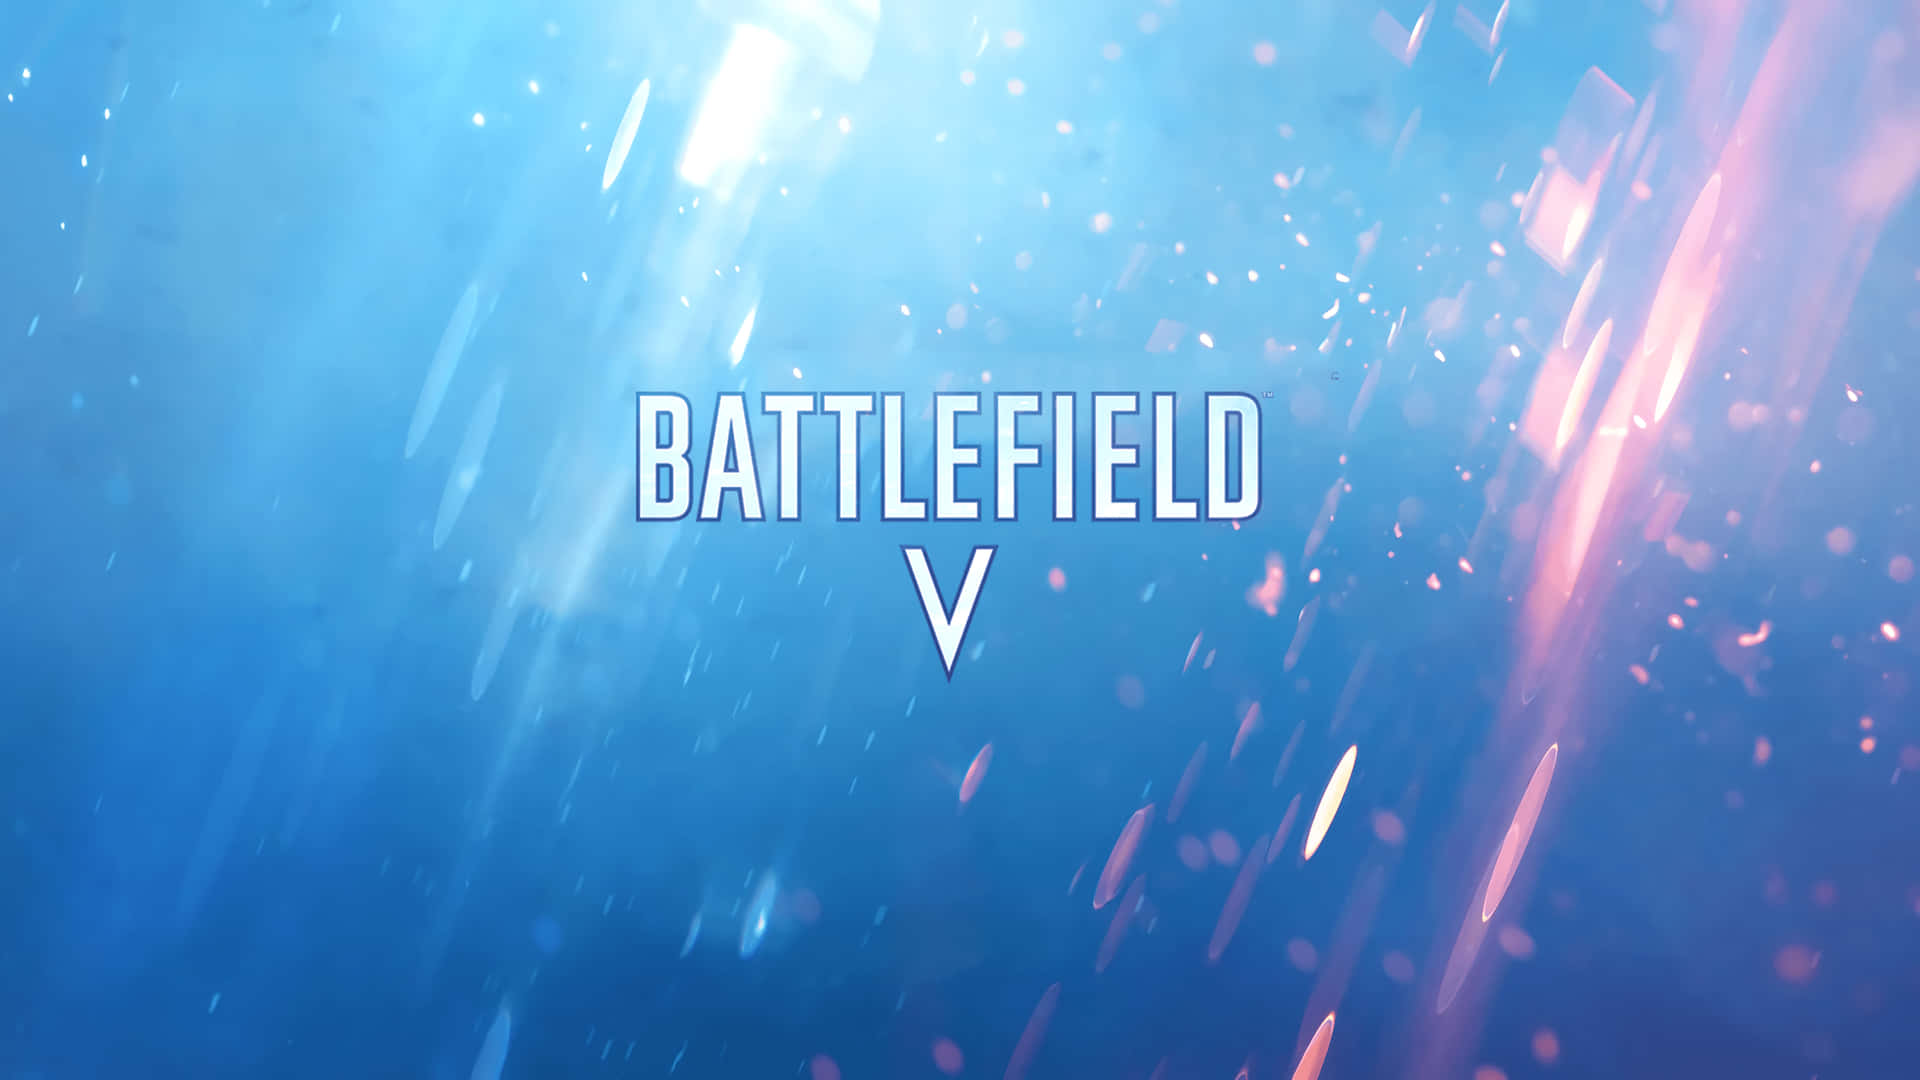 Battlefield V - A Blue And Blue Background With The Words Battlefield V